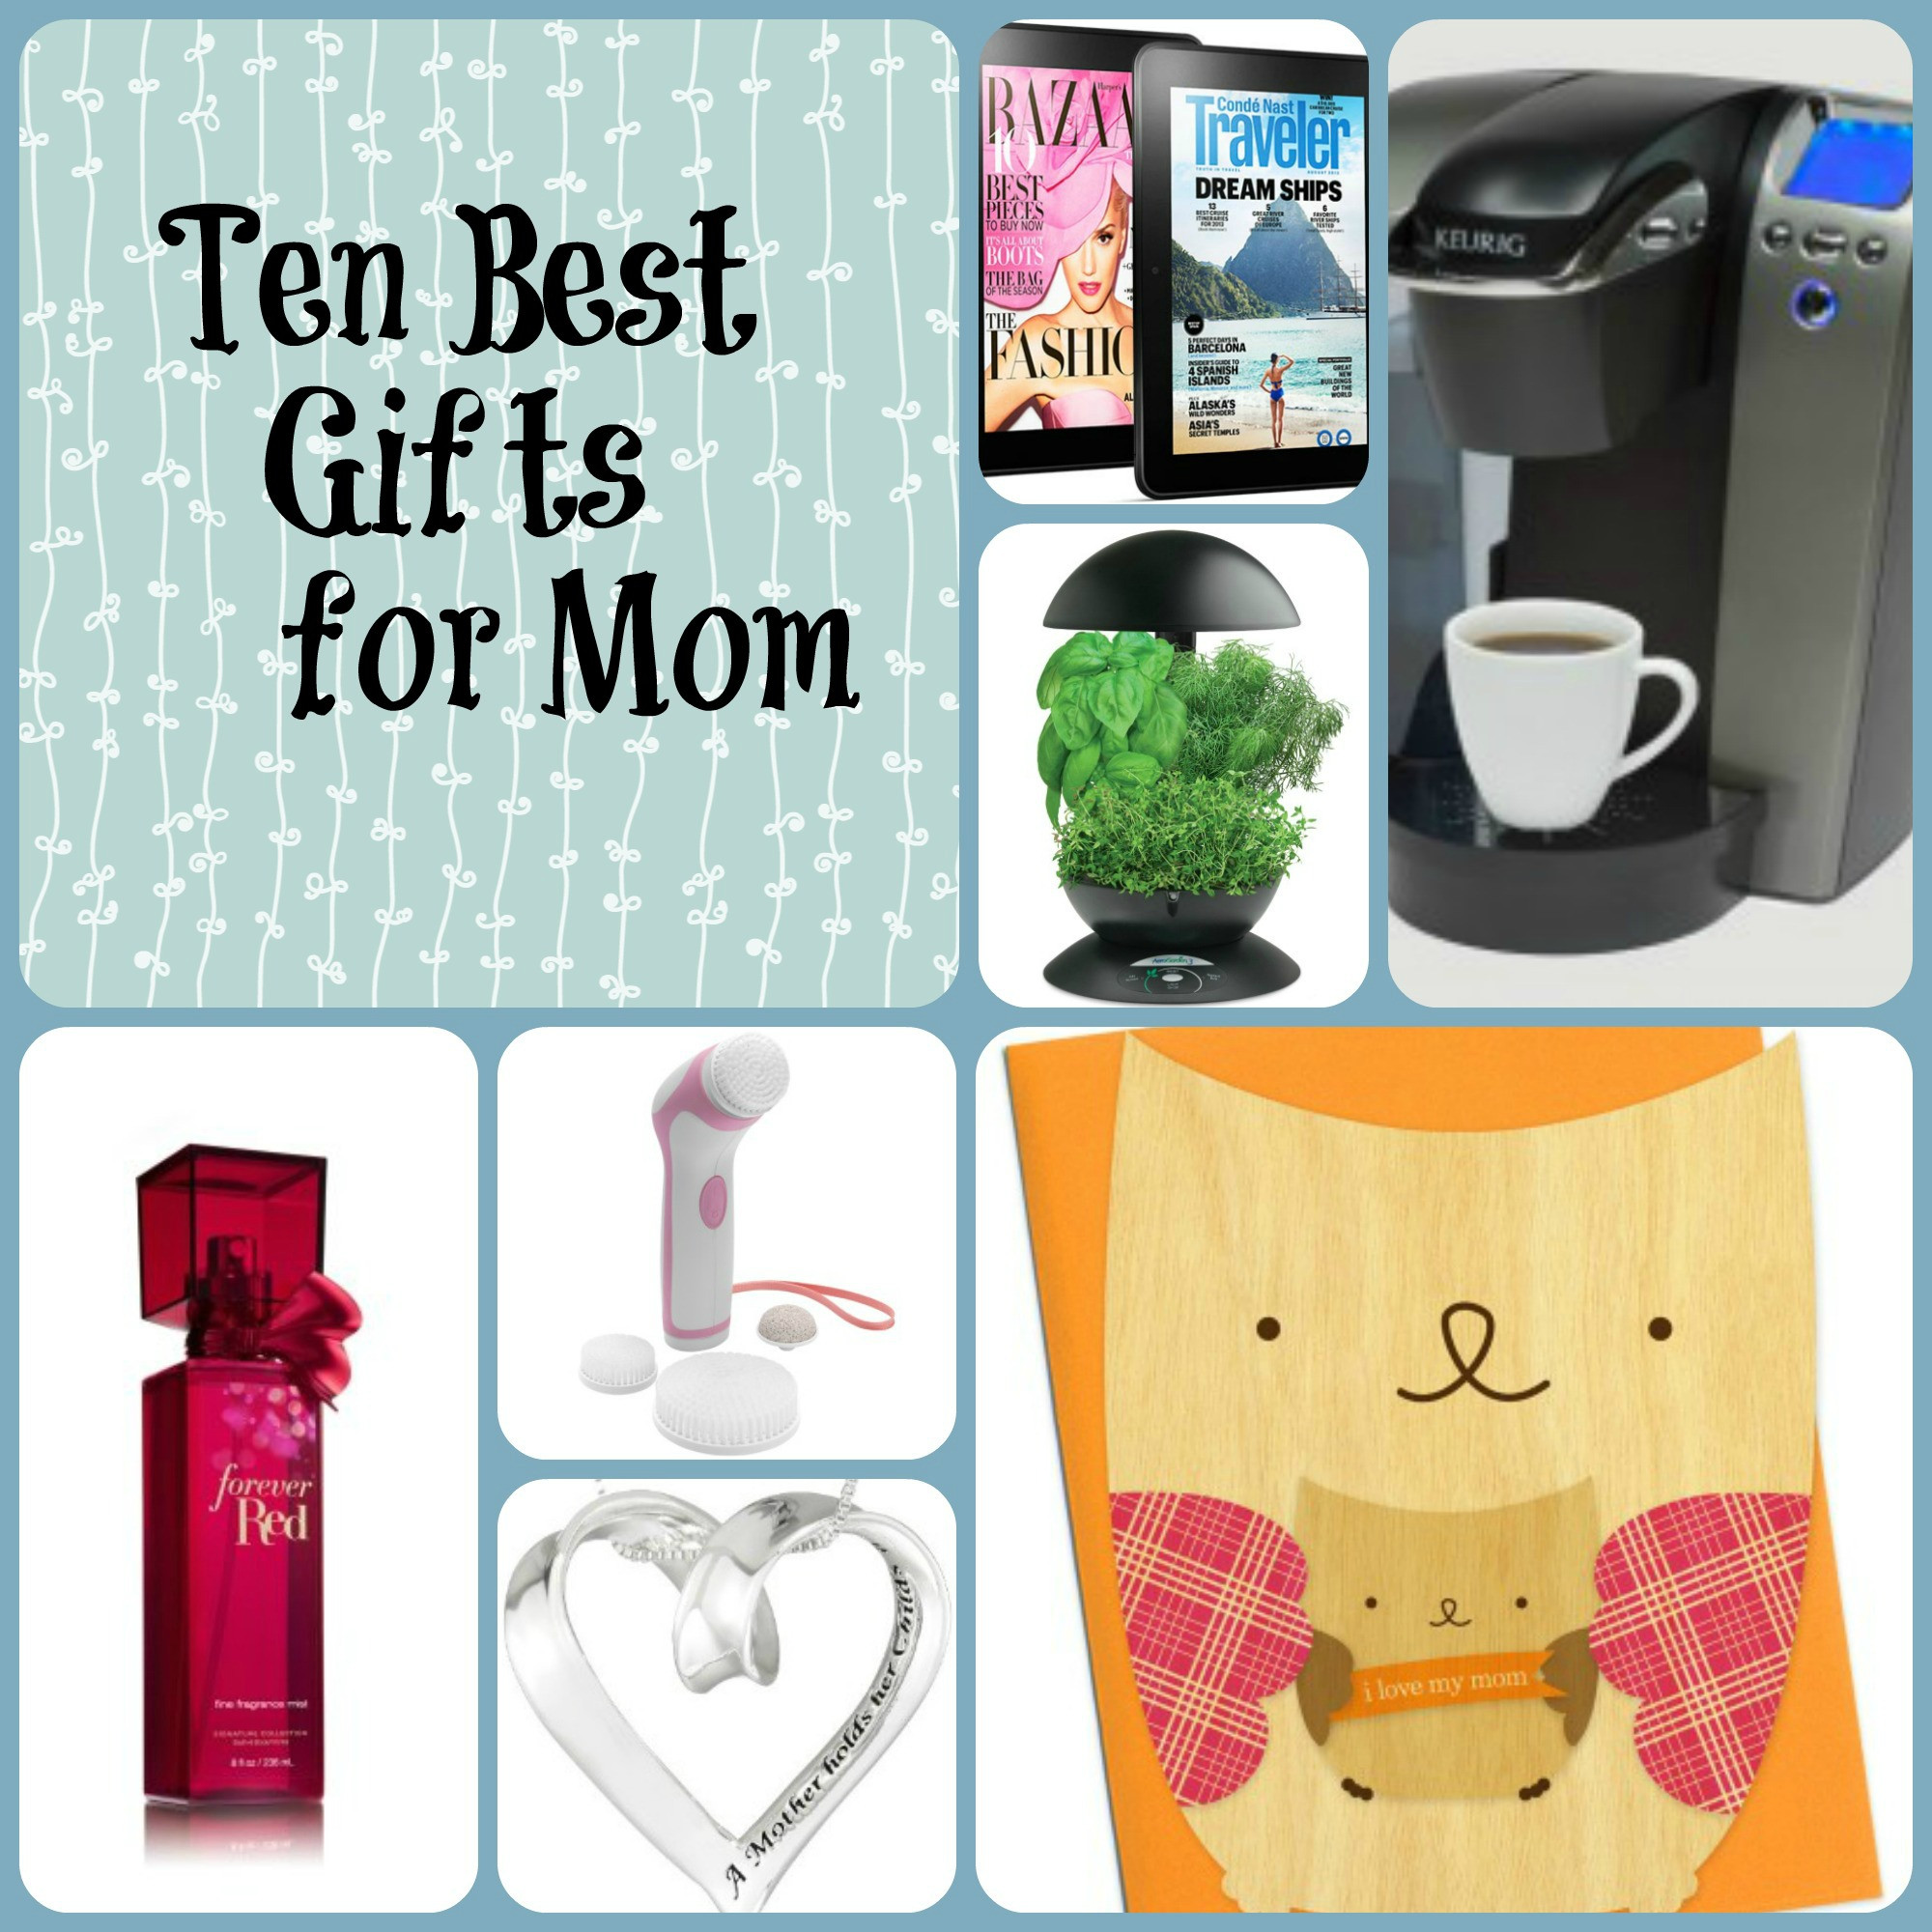 Birthday Gift For Mom Ideas
 Ten Best Gifts for Mom